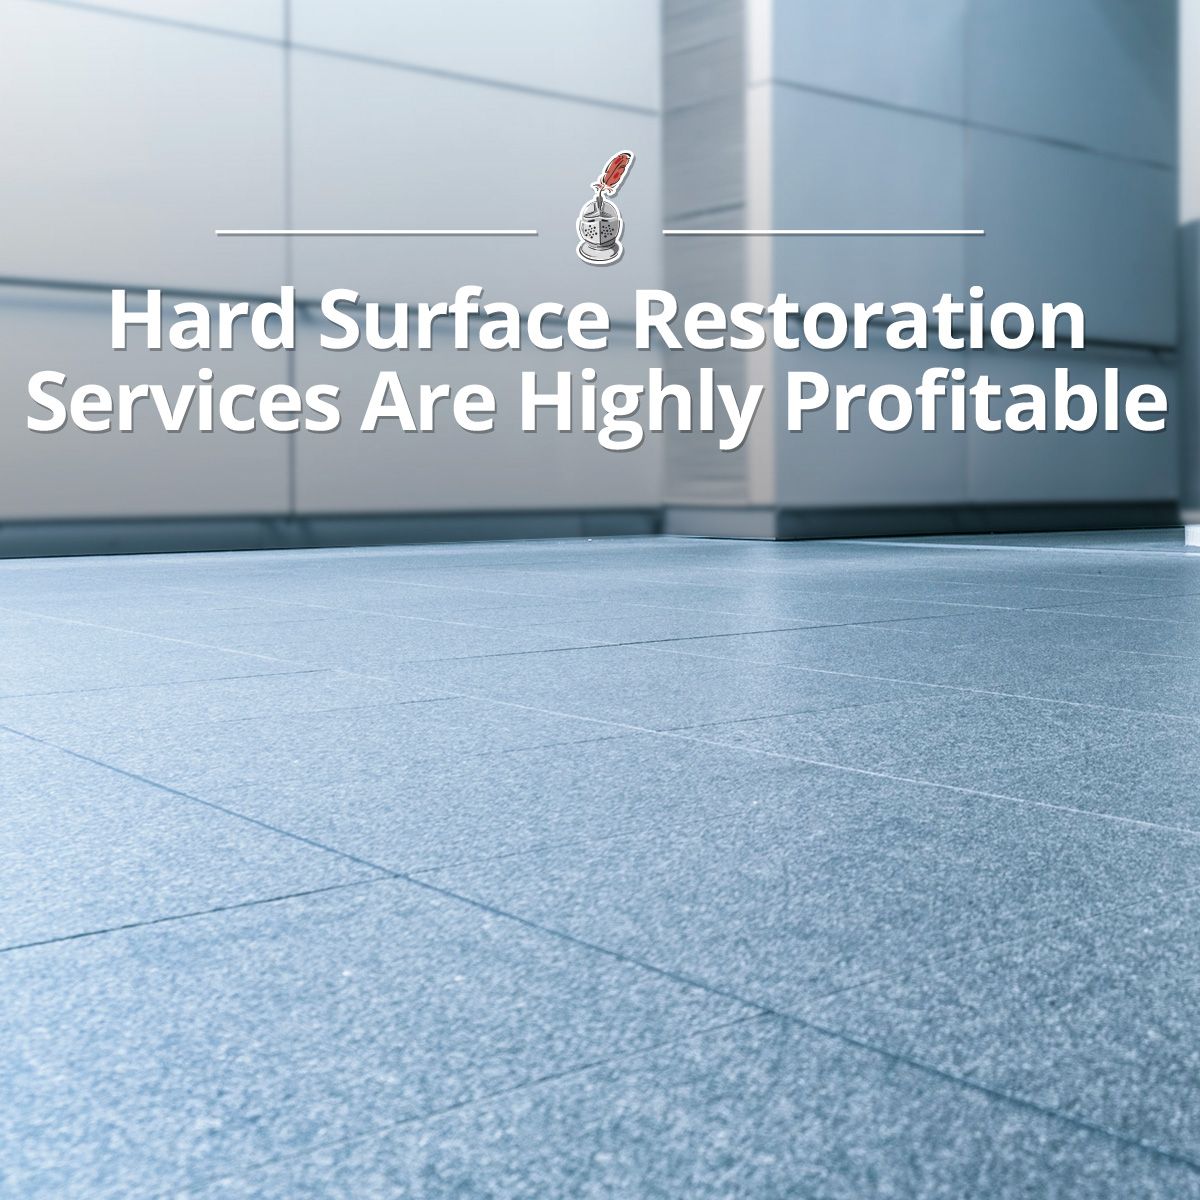 Hard Surface Restoration Services Are Highly Profitable